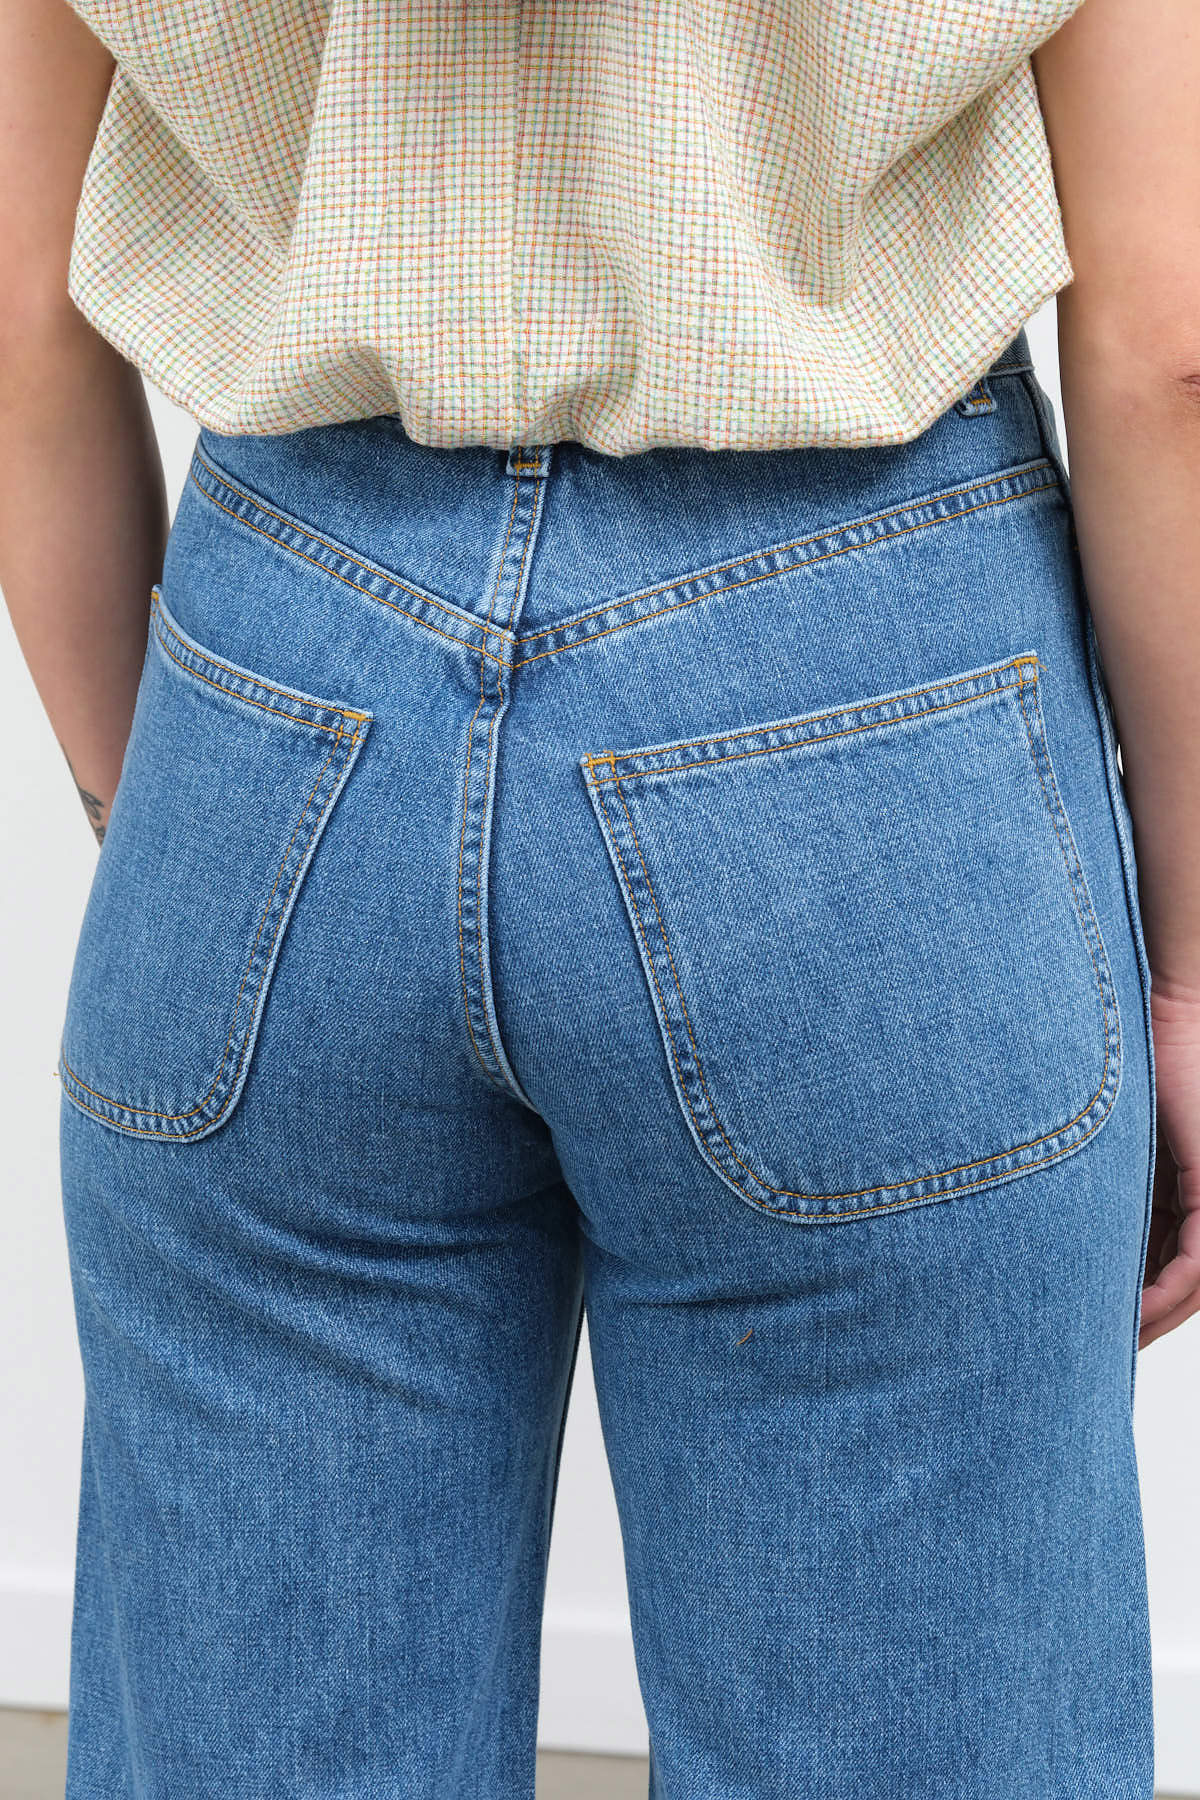 Rear pocket view of The 225 in Cowboy Blue Denim